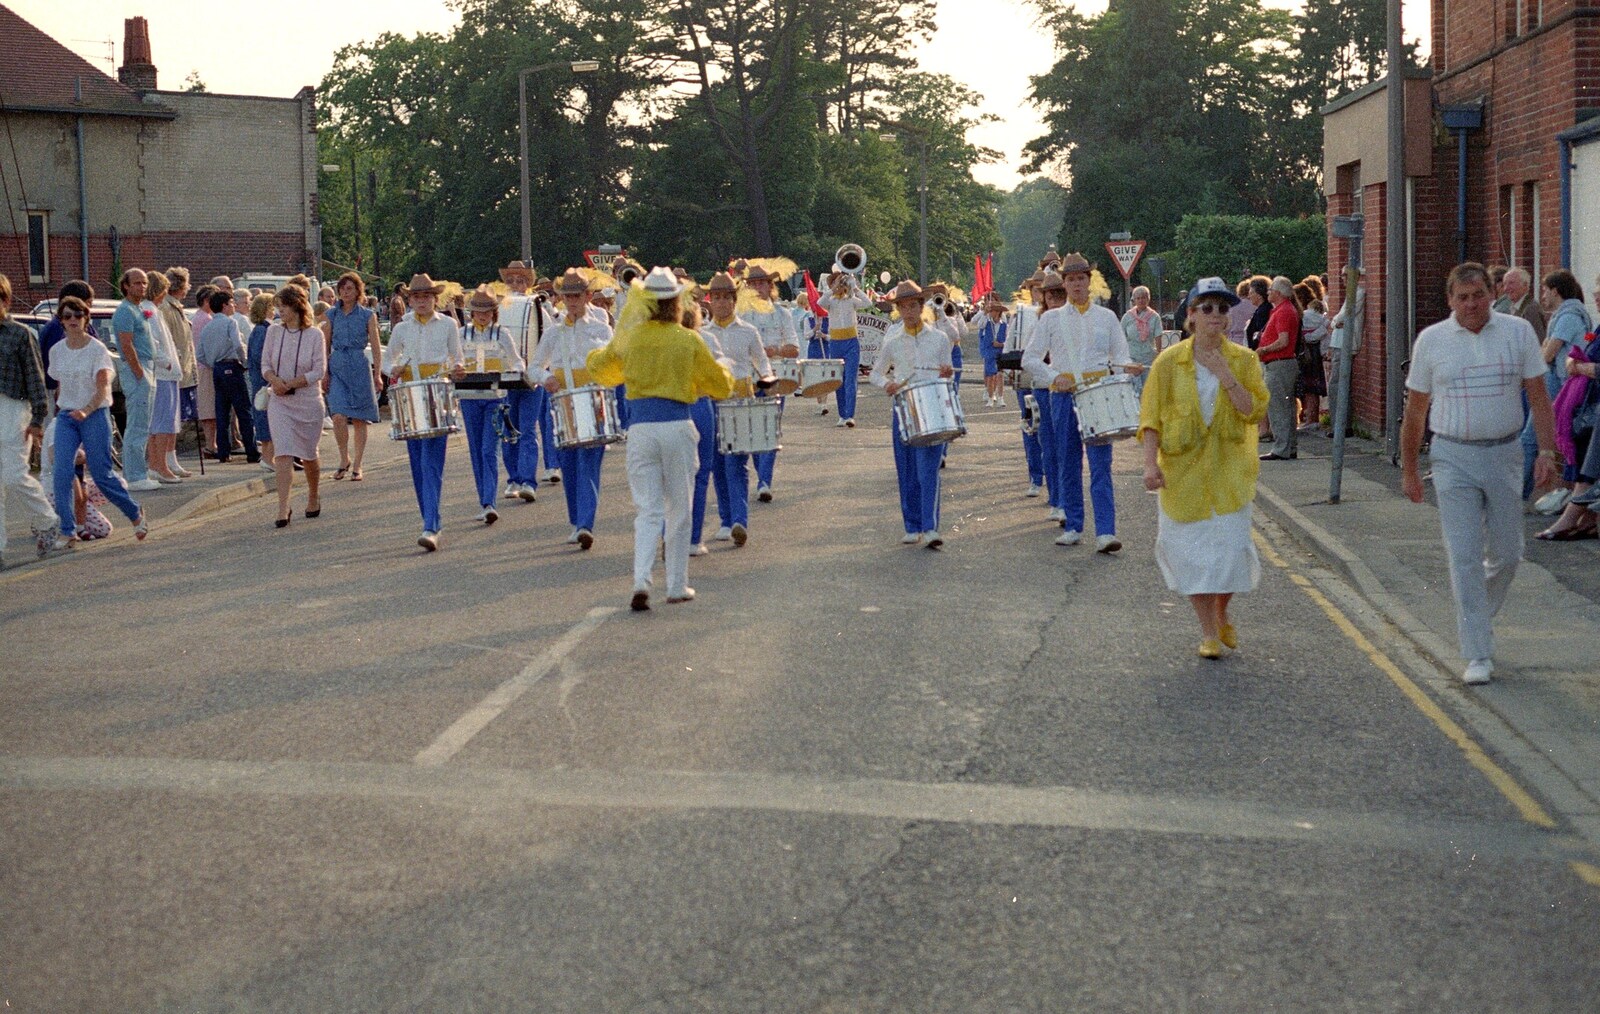 A marching band from Sean and the New Milton Carnival, Hampshire - 1st August 1986